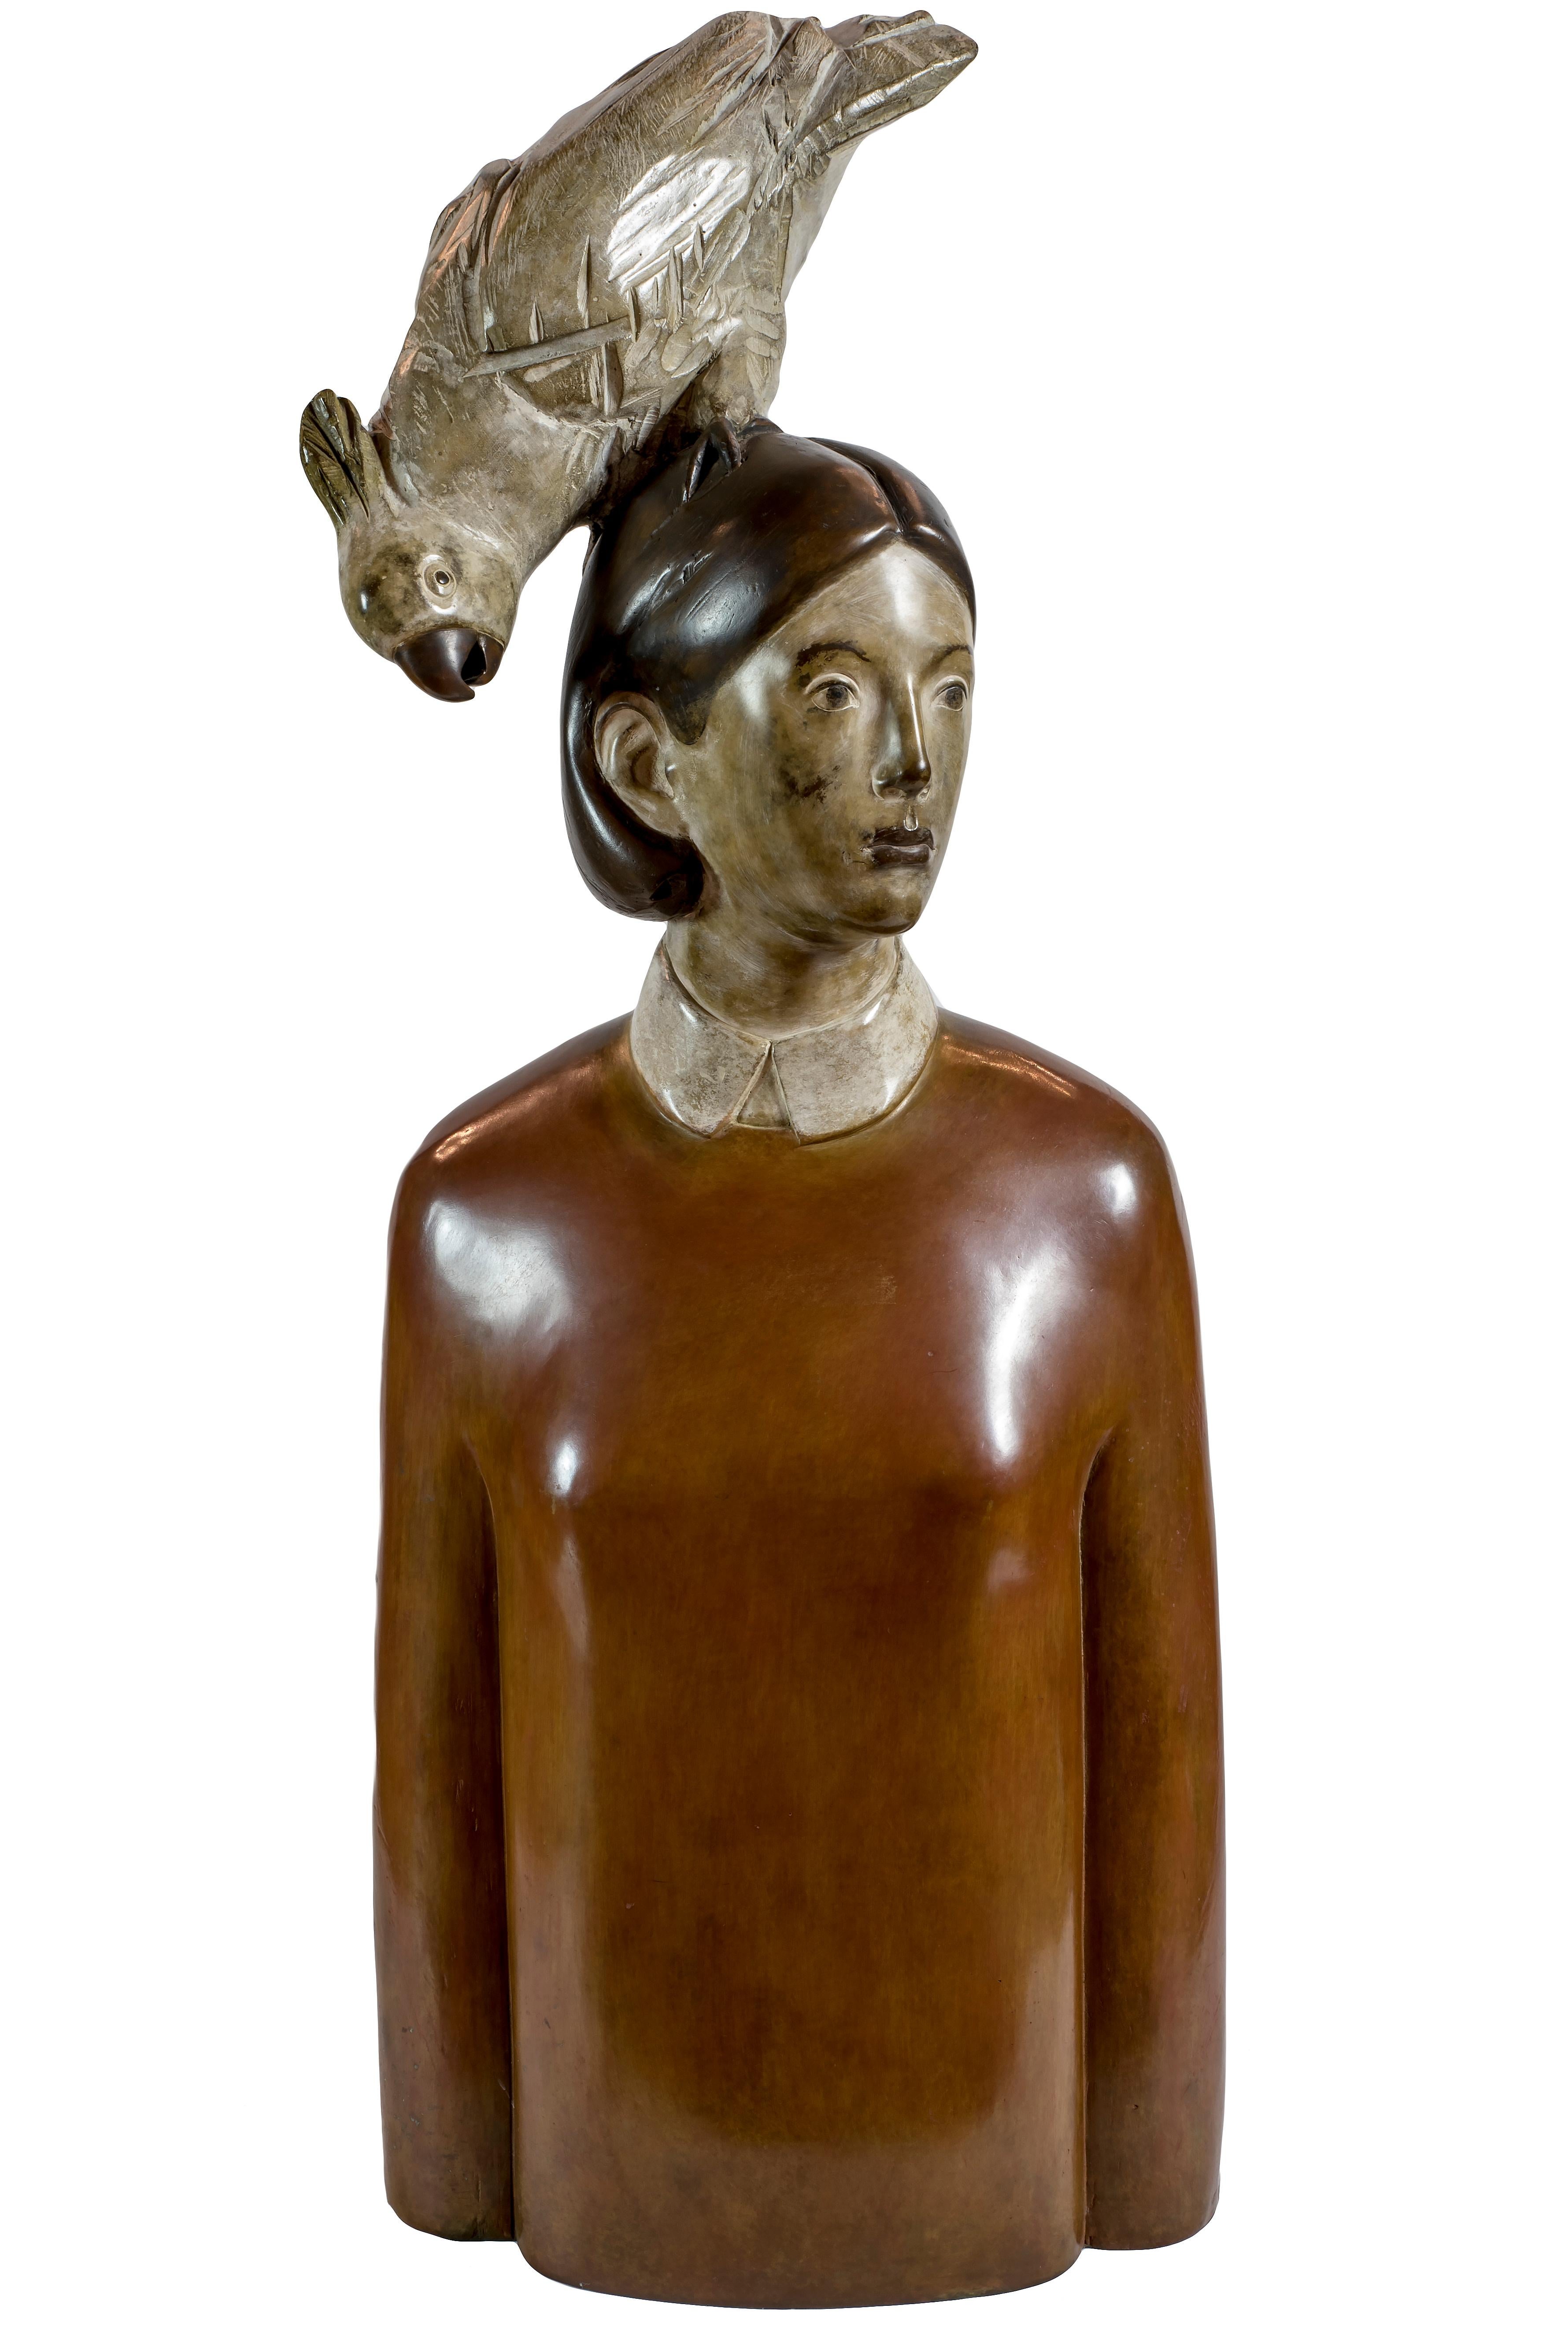 Woman with Parrot is an original contemporary sculpture realized in 2000 by the Italian contemporary artist Aron Demetz.

Original Bronze.

Hand-signed and dated: 2000 Aron Demetz.

Mint conditions. 

Beautiful contemporary sculpture depicting a